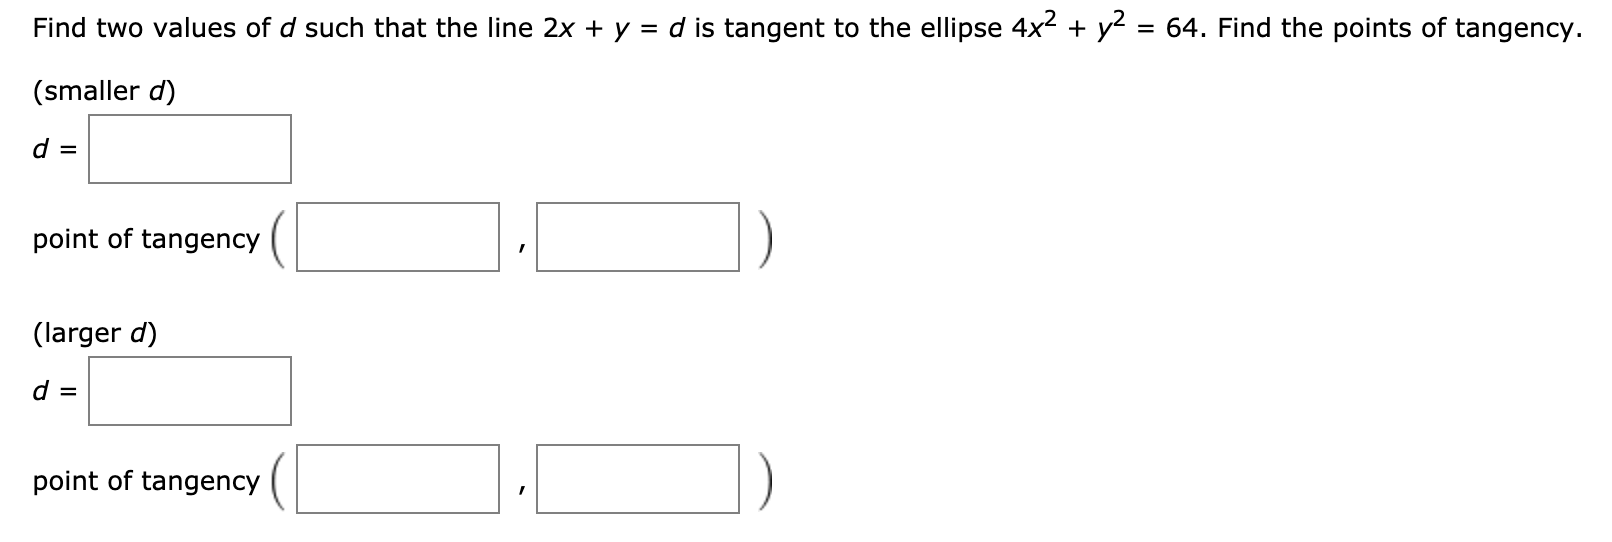 64. Find the points of tangency
Find two values of d such that the line 2x + y = d is tangent to the ellipse 4x
y
(smaller d)
d =
point of tangency
(larger d)
point of tangency
